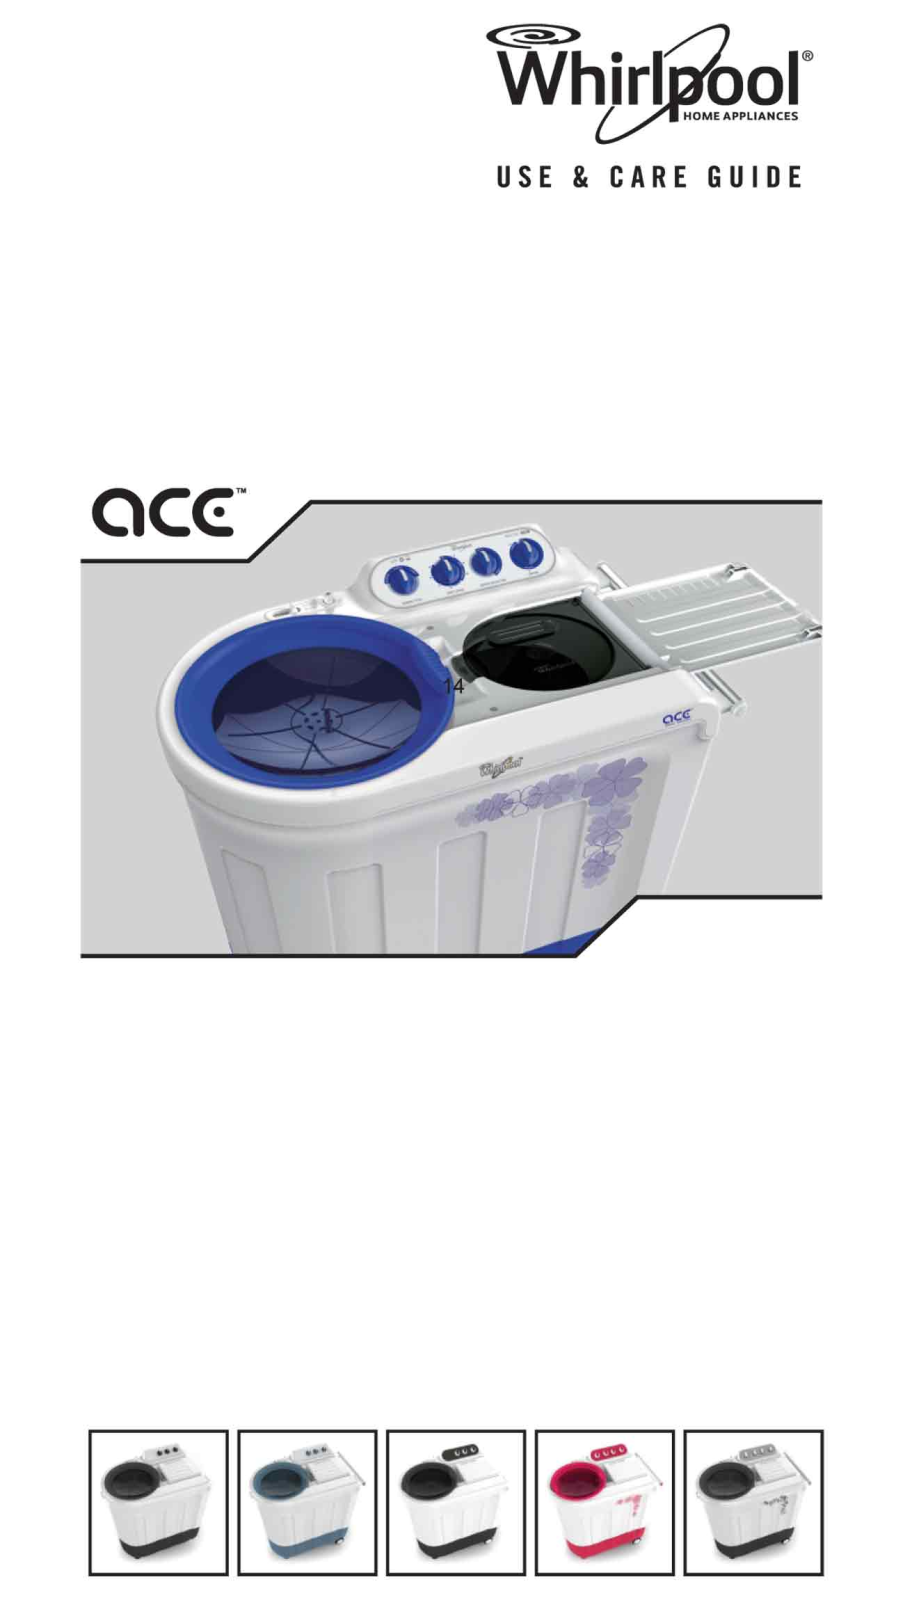 Whirlpool ACE 8.5 Turbodry, ACE 8.0 Turbodry, ACE 8.0 Stainfree, ACE 7.0 Stainfree User Manual